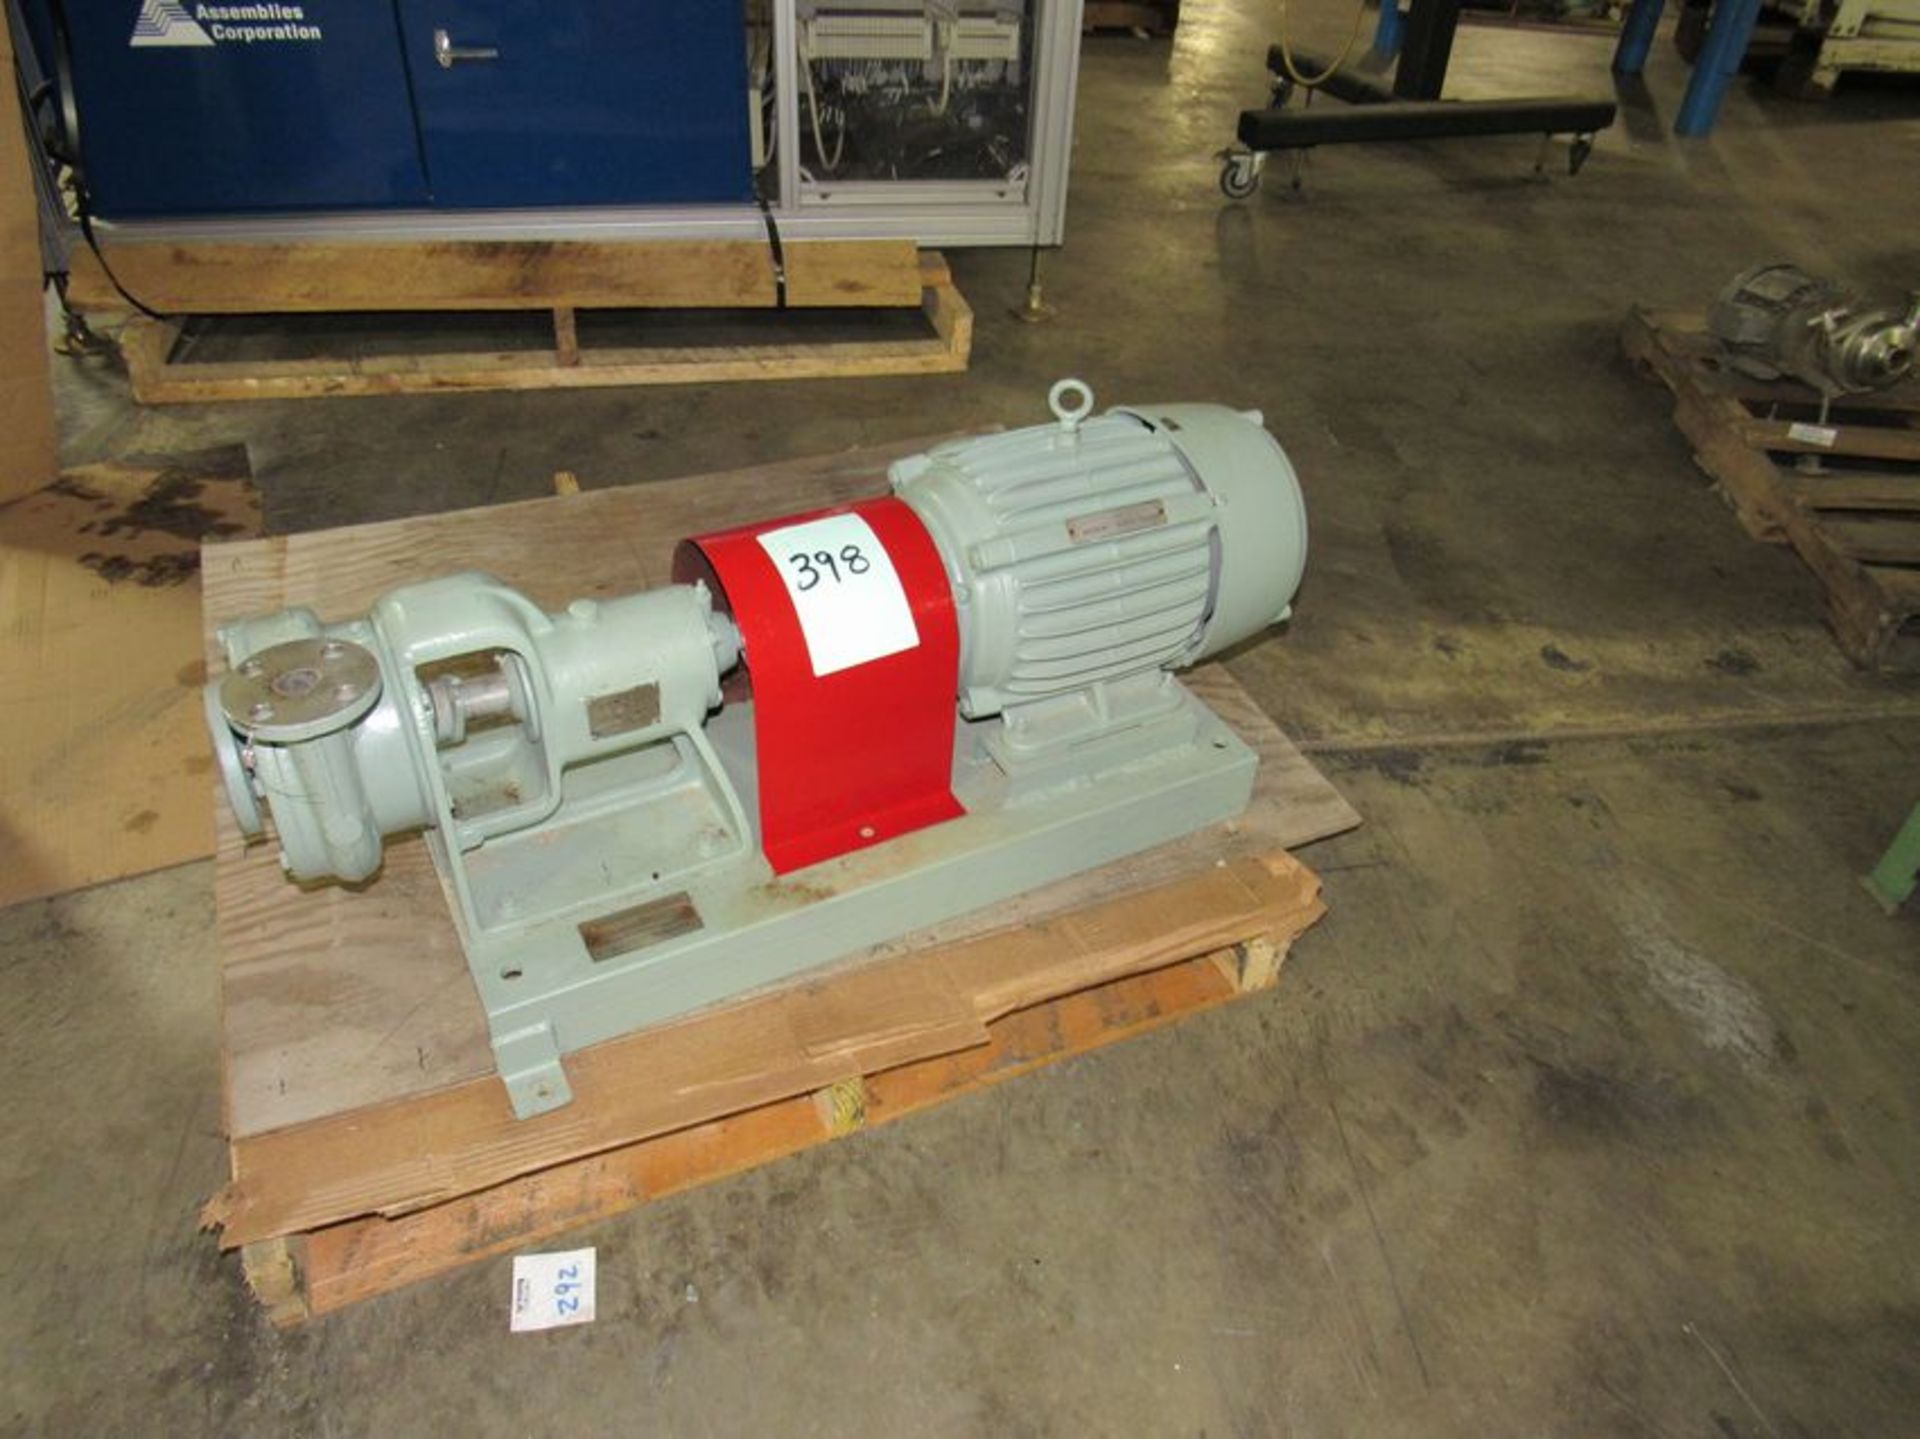 Worthington Centrifugal Pump Model D512, 1.5" by 1.0" Inlet/Outlet, Serial #Y648137P- Impeller